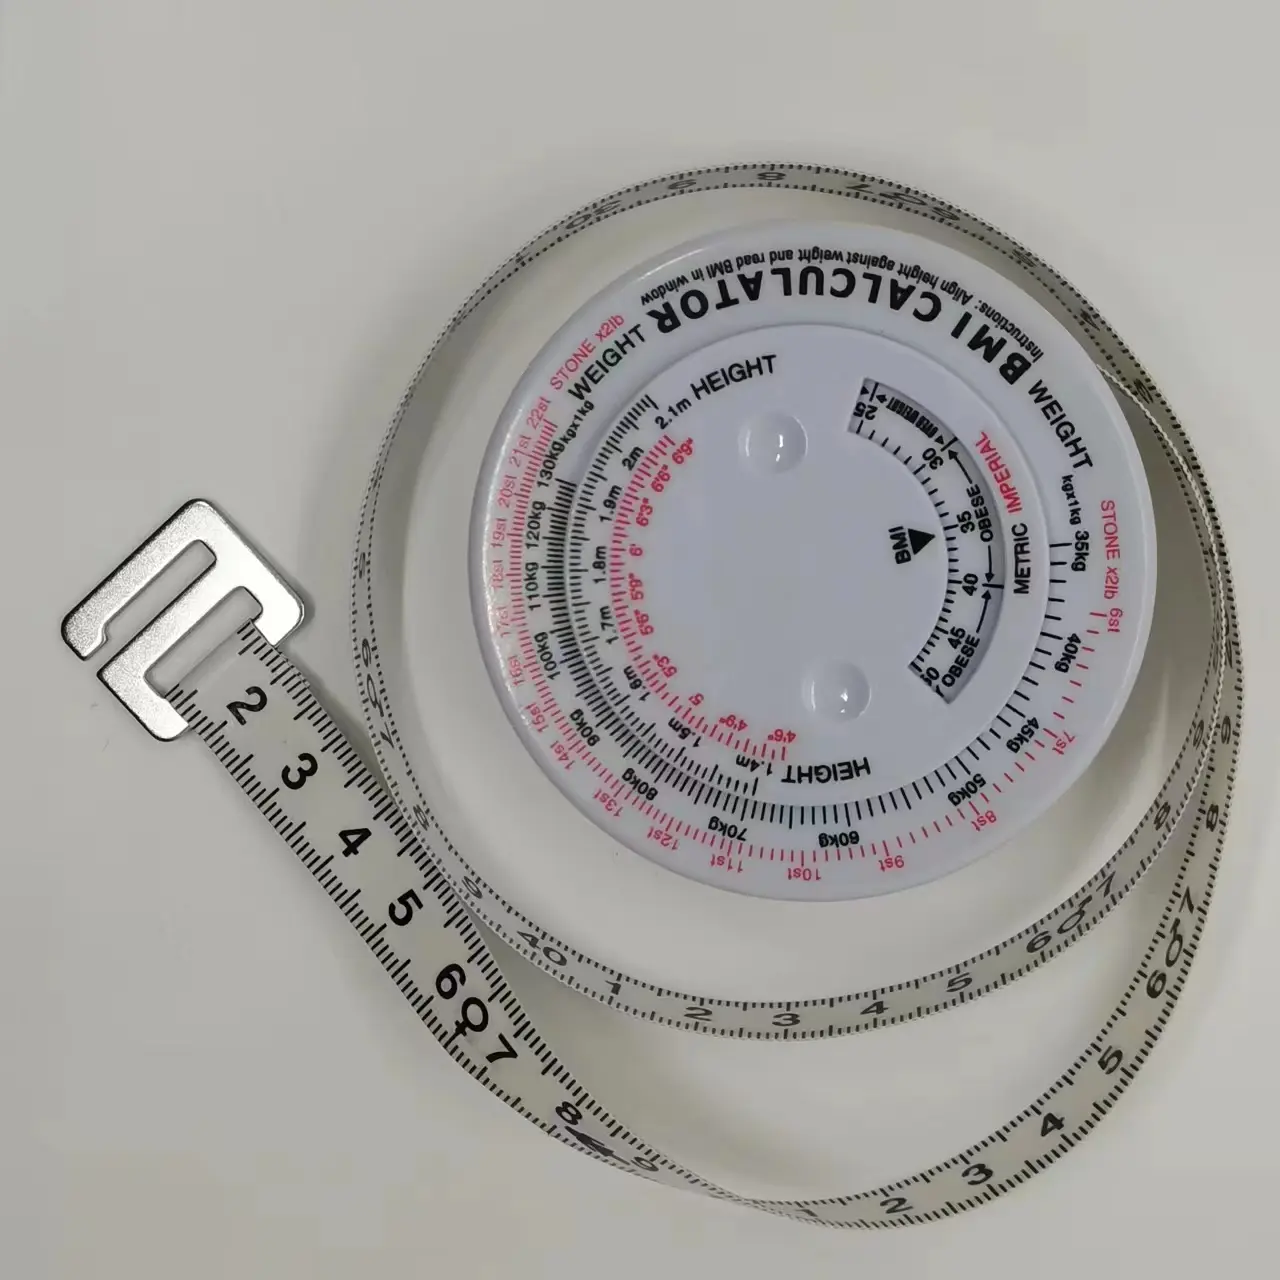 Lightweighted Abs Plastic Body Bmi Measurement Flexible Ruler Head Circumference Tape Measure Waist Measuring Tape